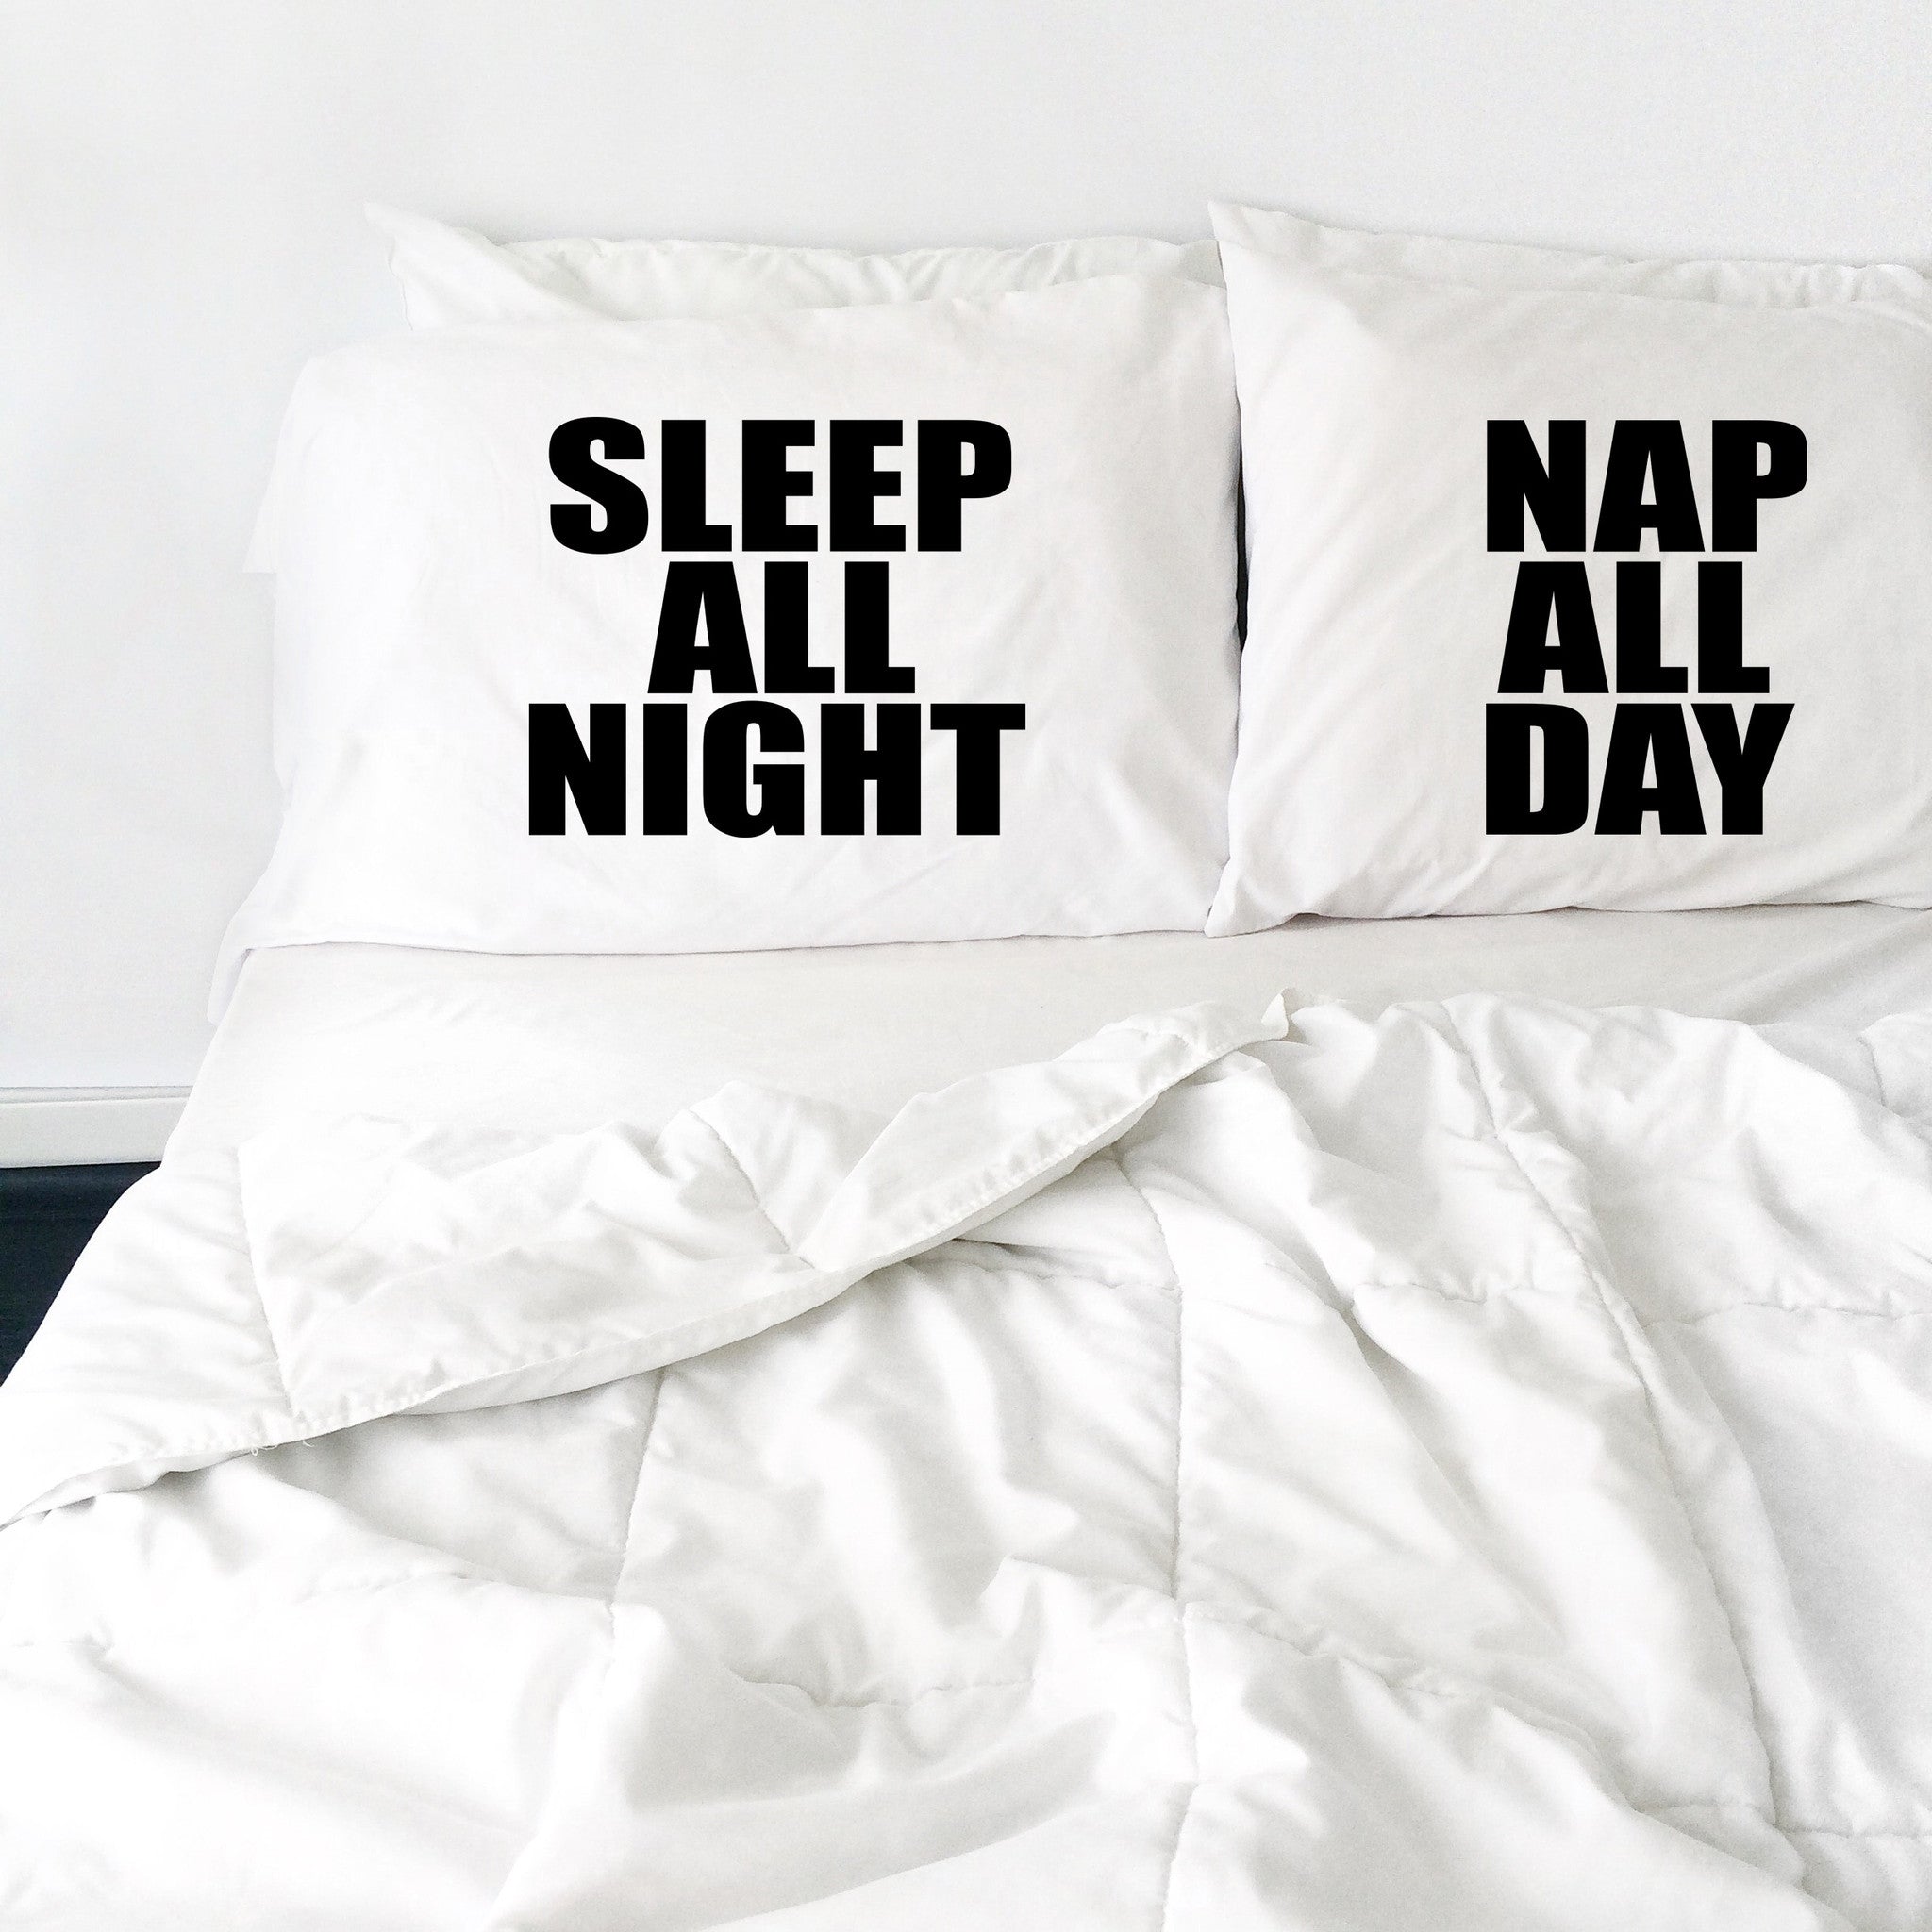 Sleep All Night Nap All Day - Couple's Pillow Case Set